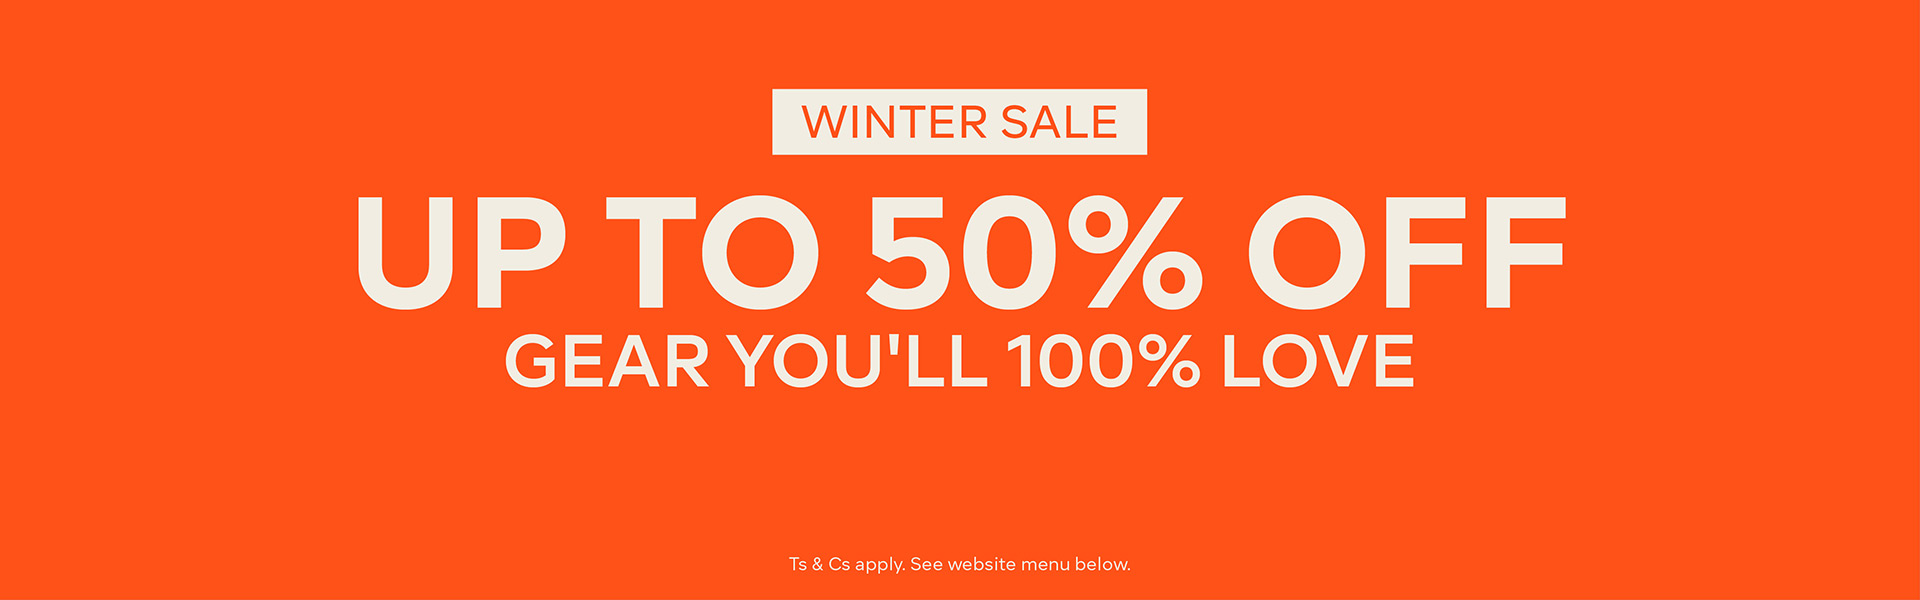 WINTER SALE, UP TO 50% OFF, GEAR YOU'LL 100% LOVE